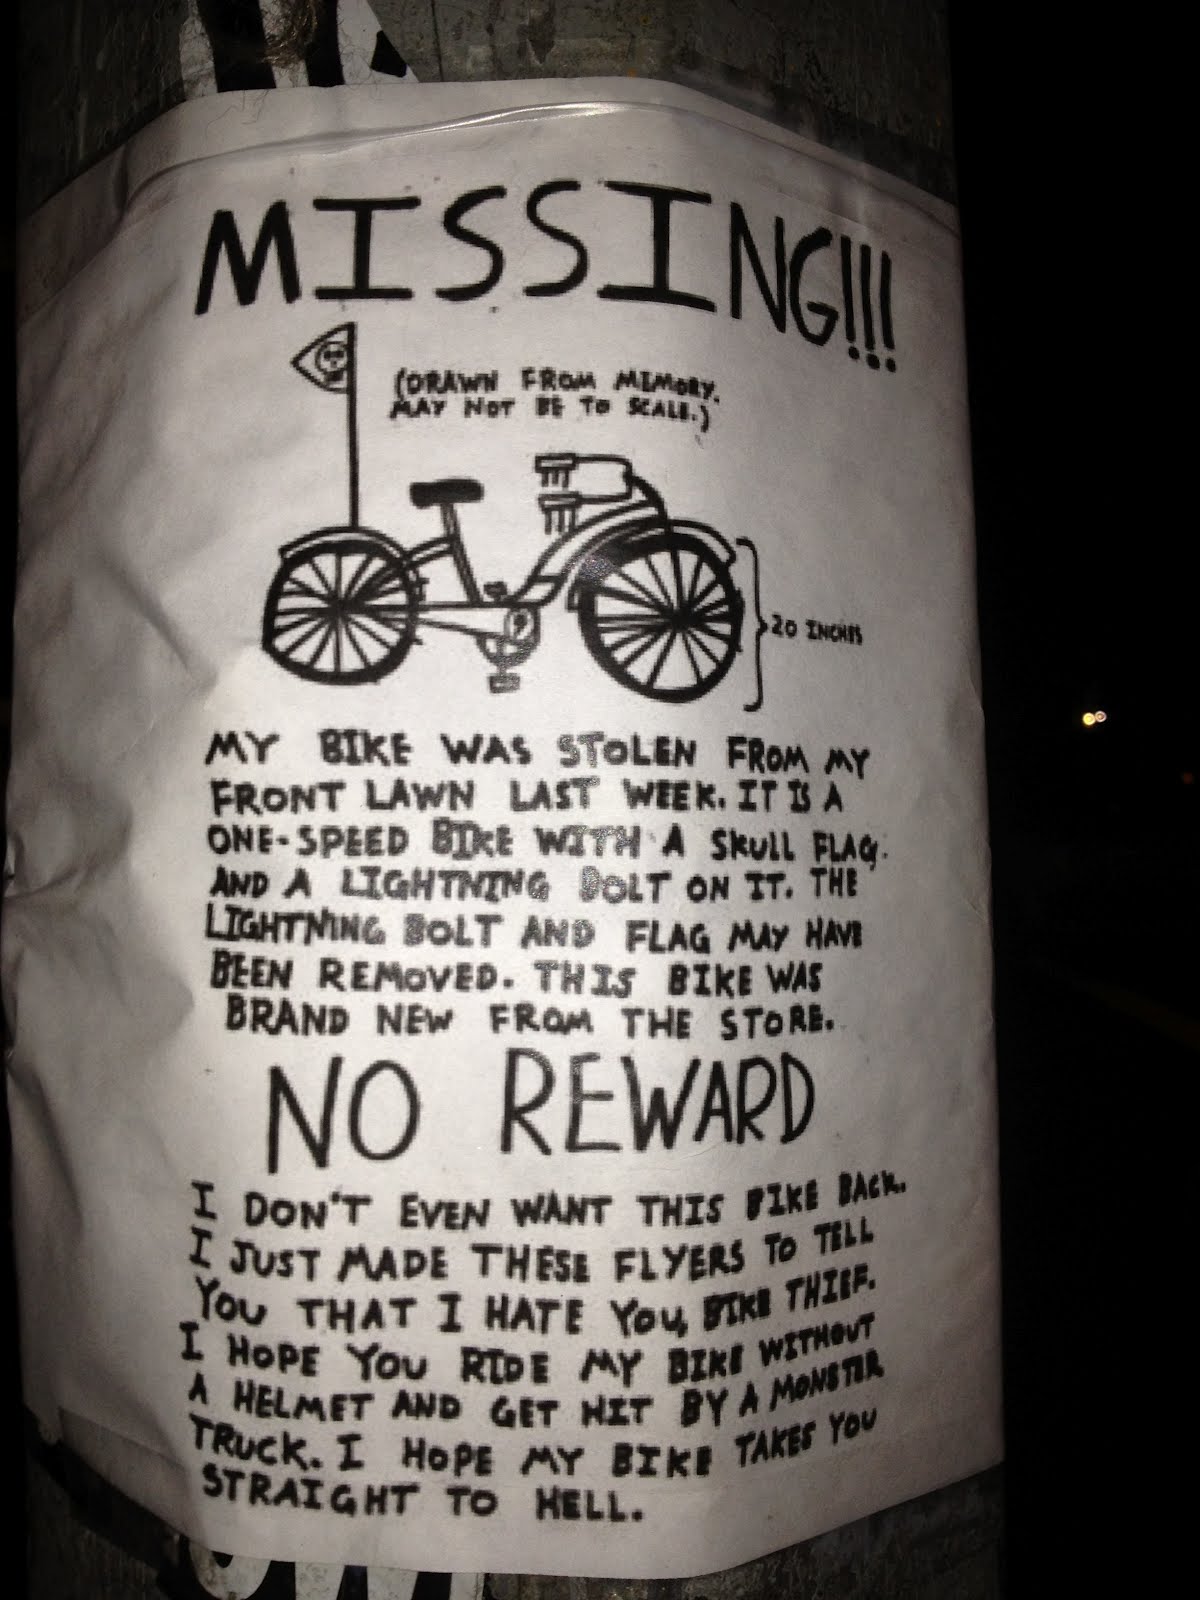 EV Grieve: [Updated] Perhaps the greatest missing bike flyer ever